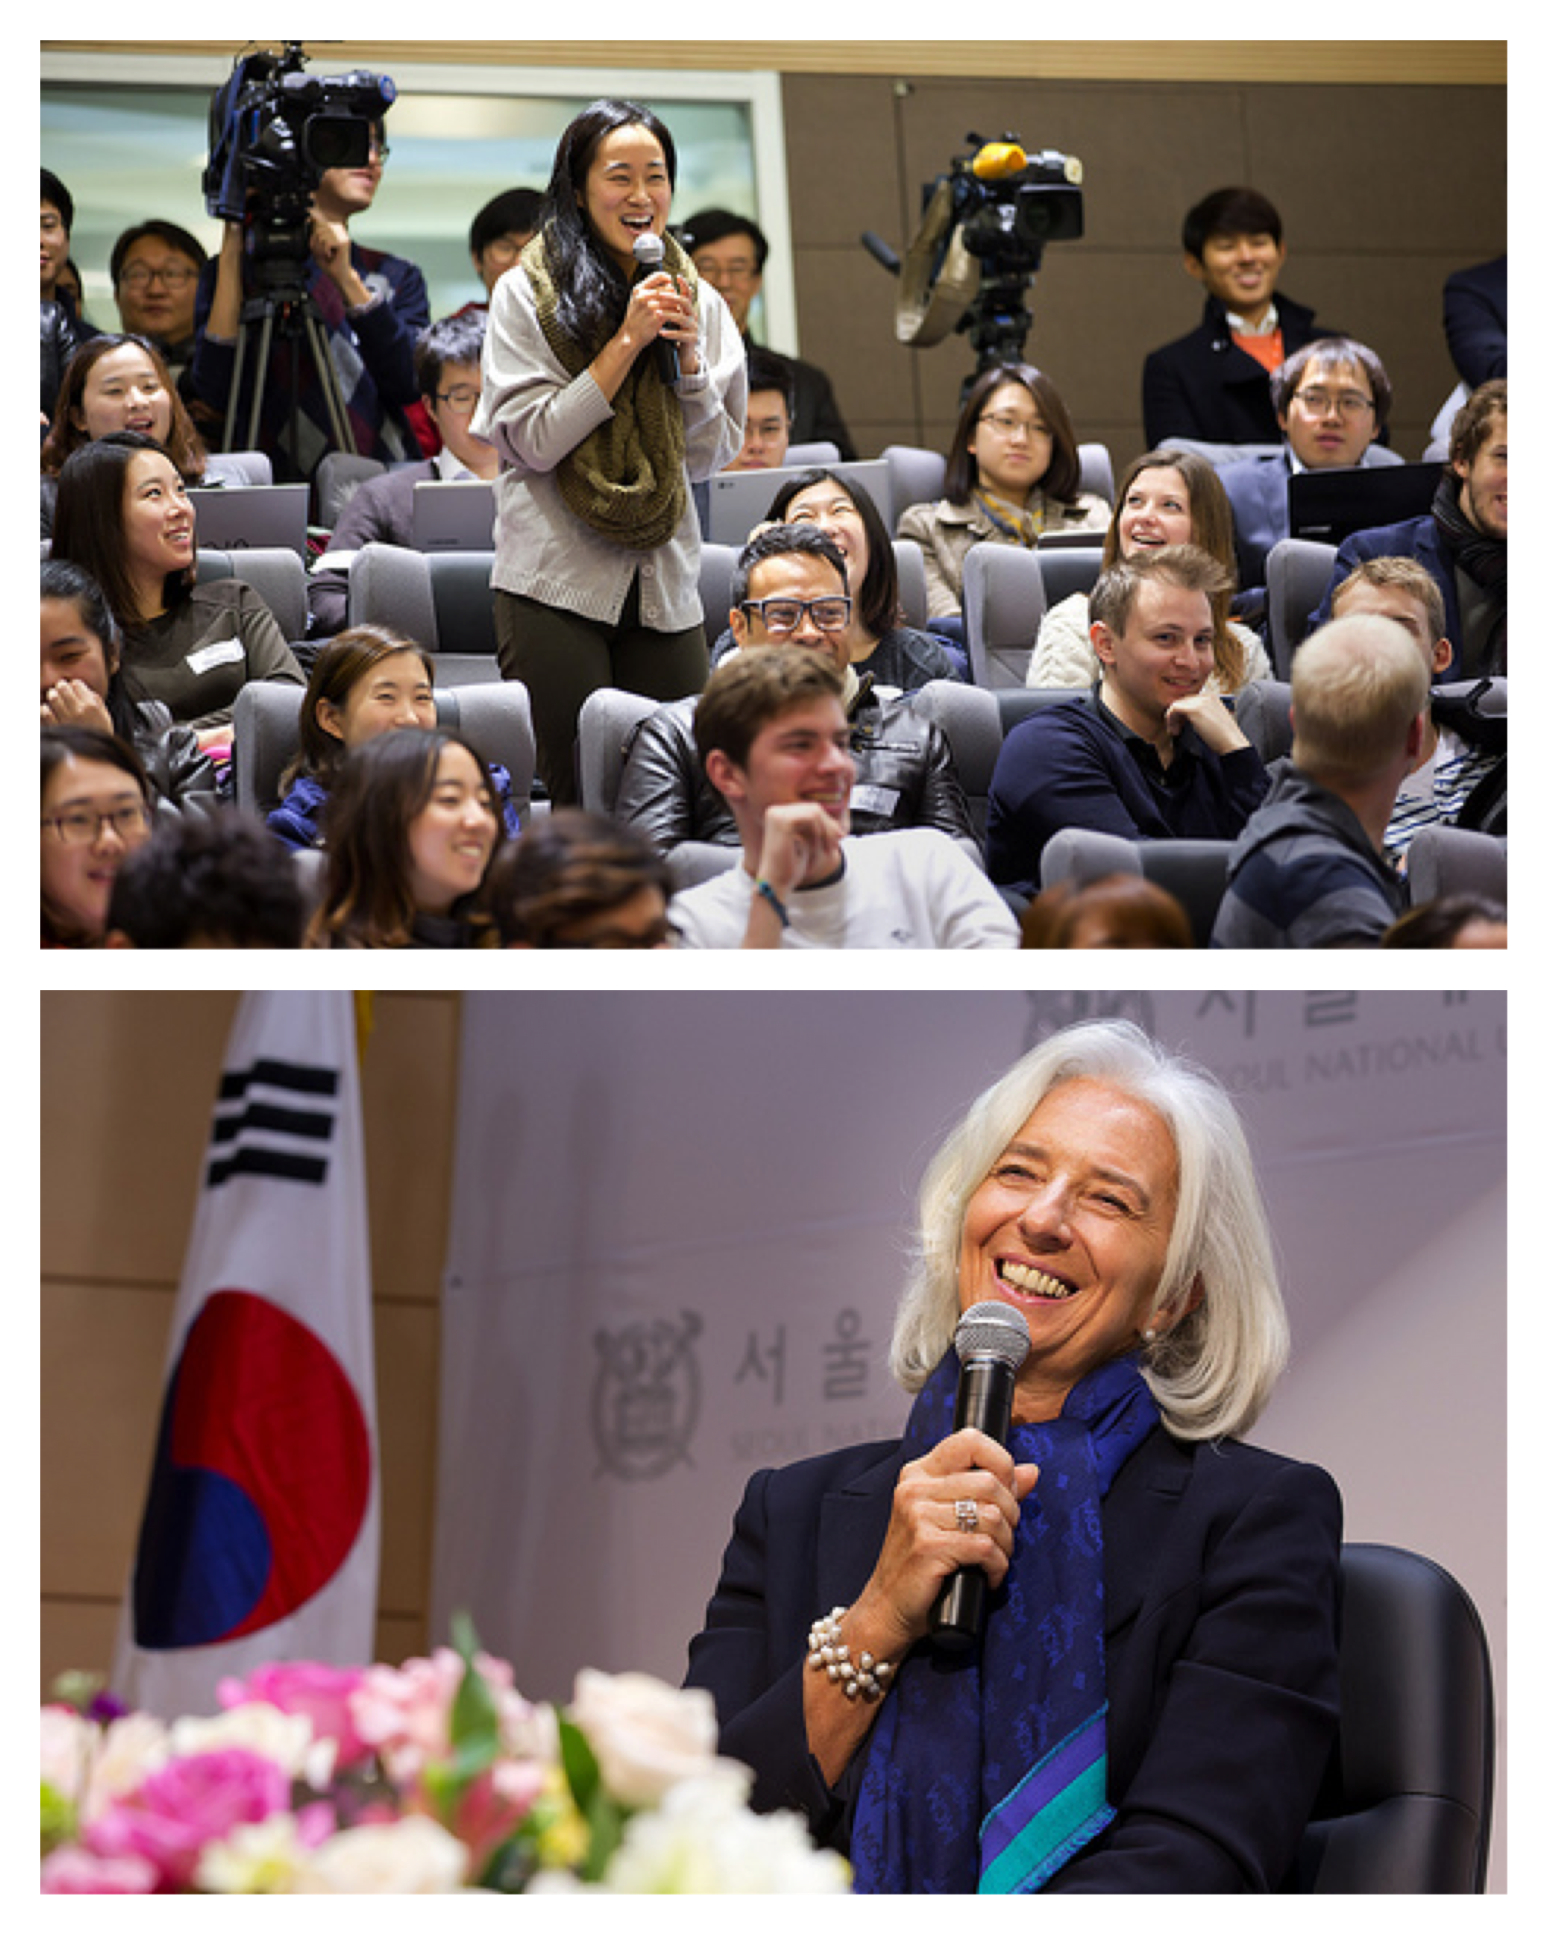 A student asks International Monetary Fund Managing Director Christine Lagarde a question after she spoke at the Student Town Hall at Seoul National University December 5, 2013 in Seoul, Korea Lagarde is on a three country visit to Asia. IMF Photograph/Stephen Jaffe